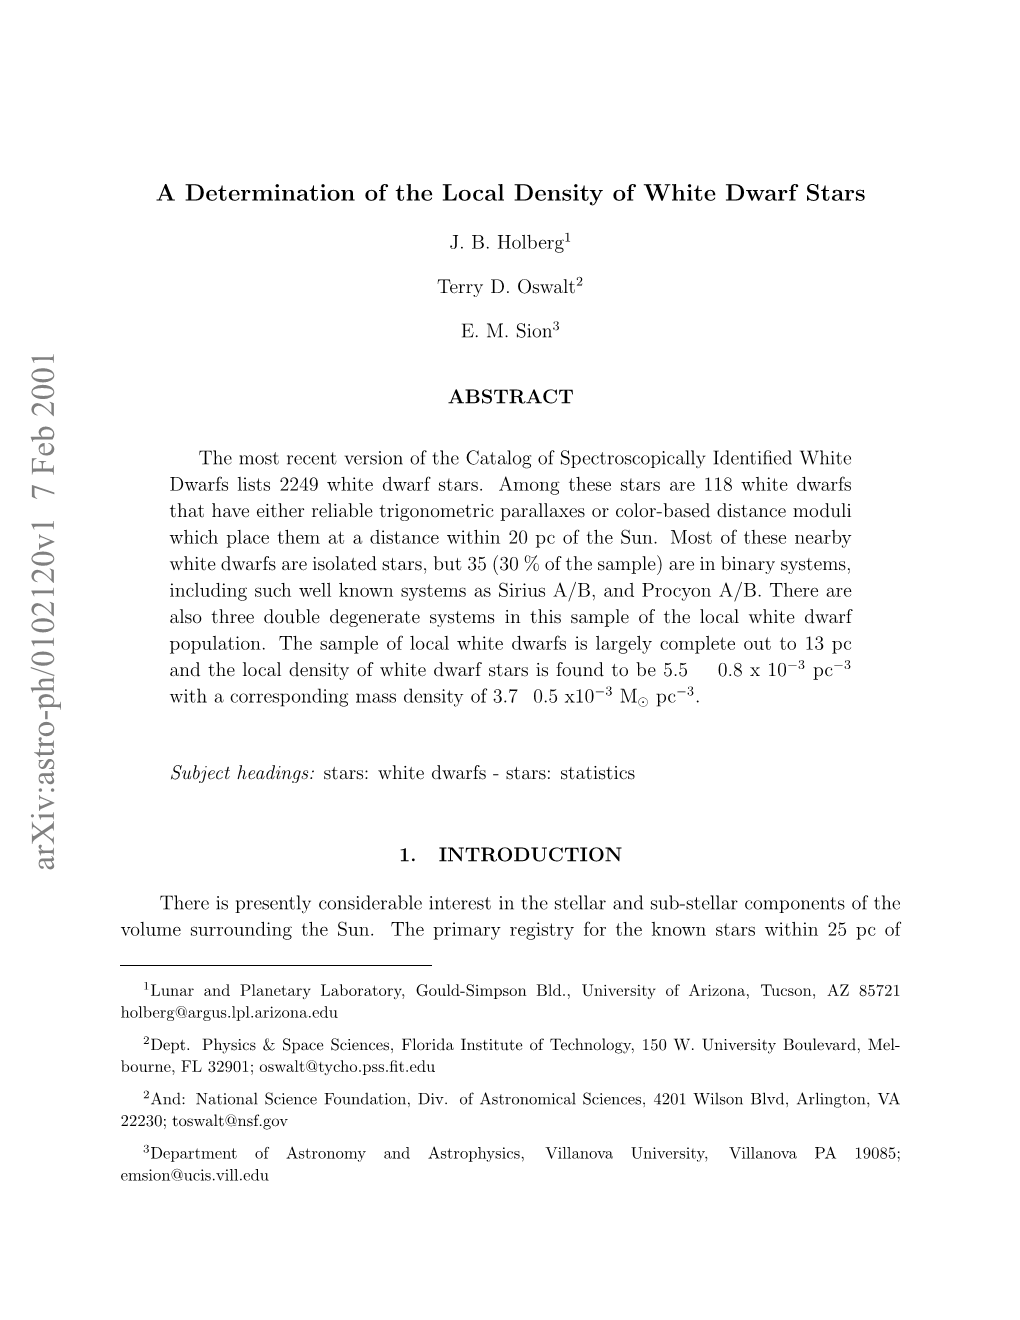 A Determination of the Local Density of White Dwarf Stars